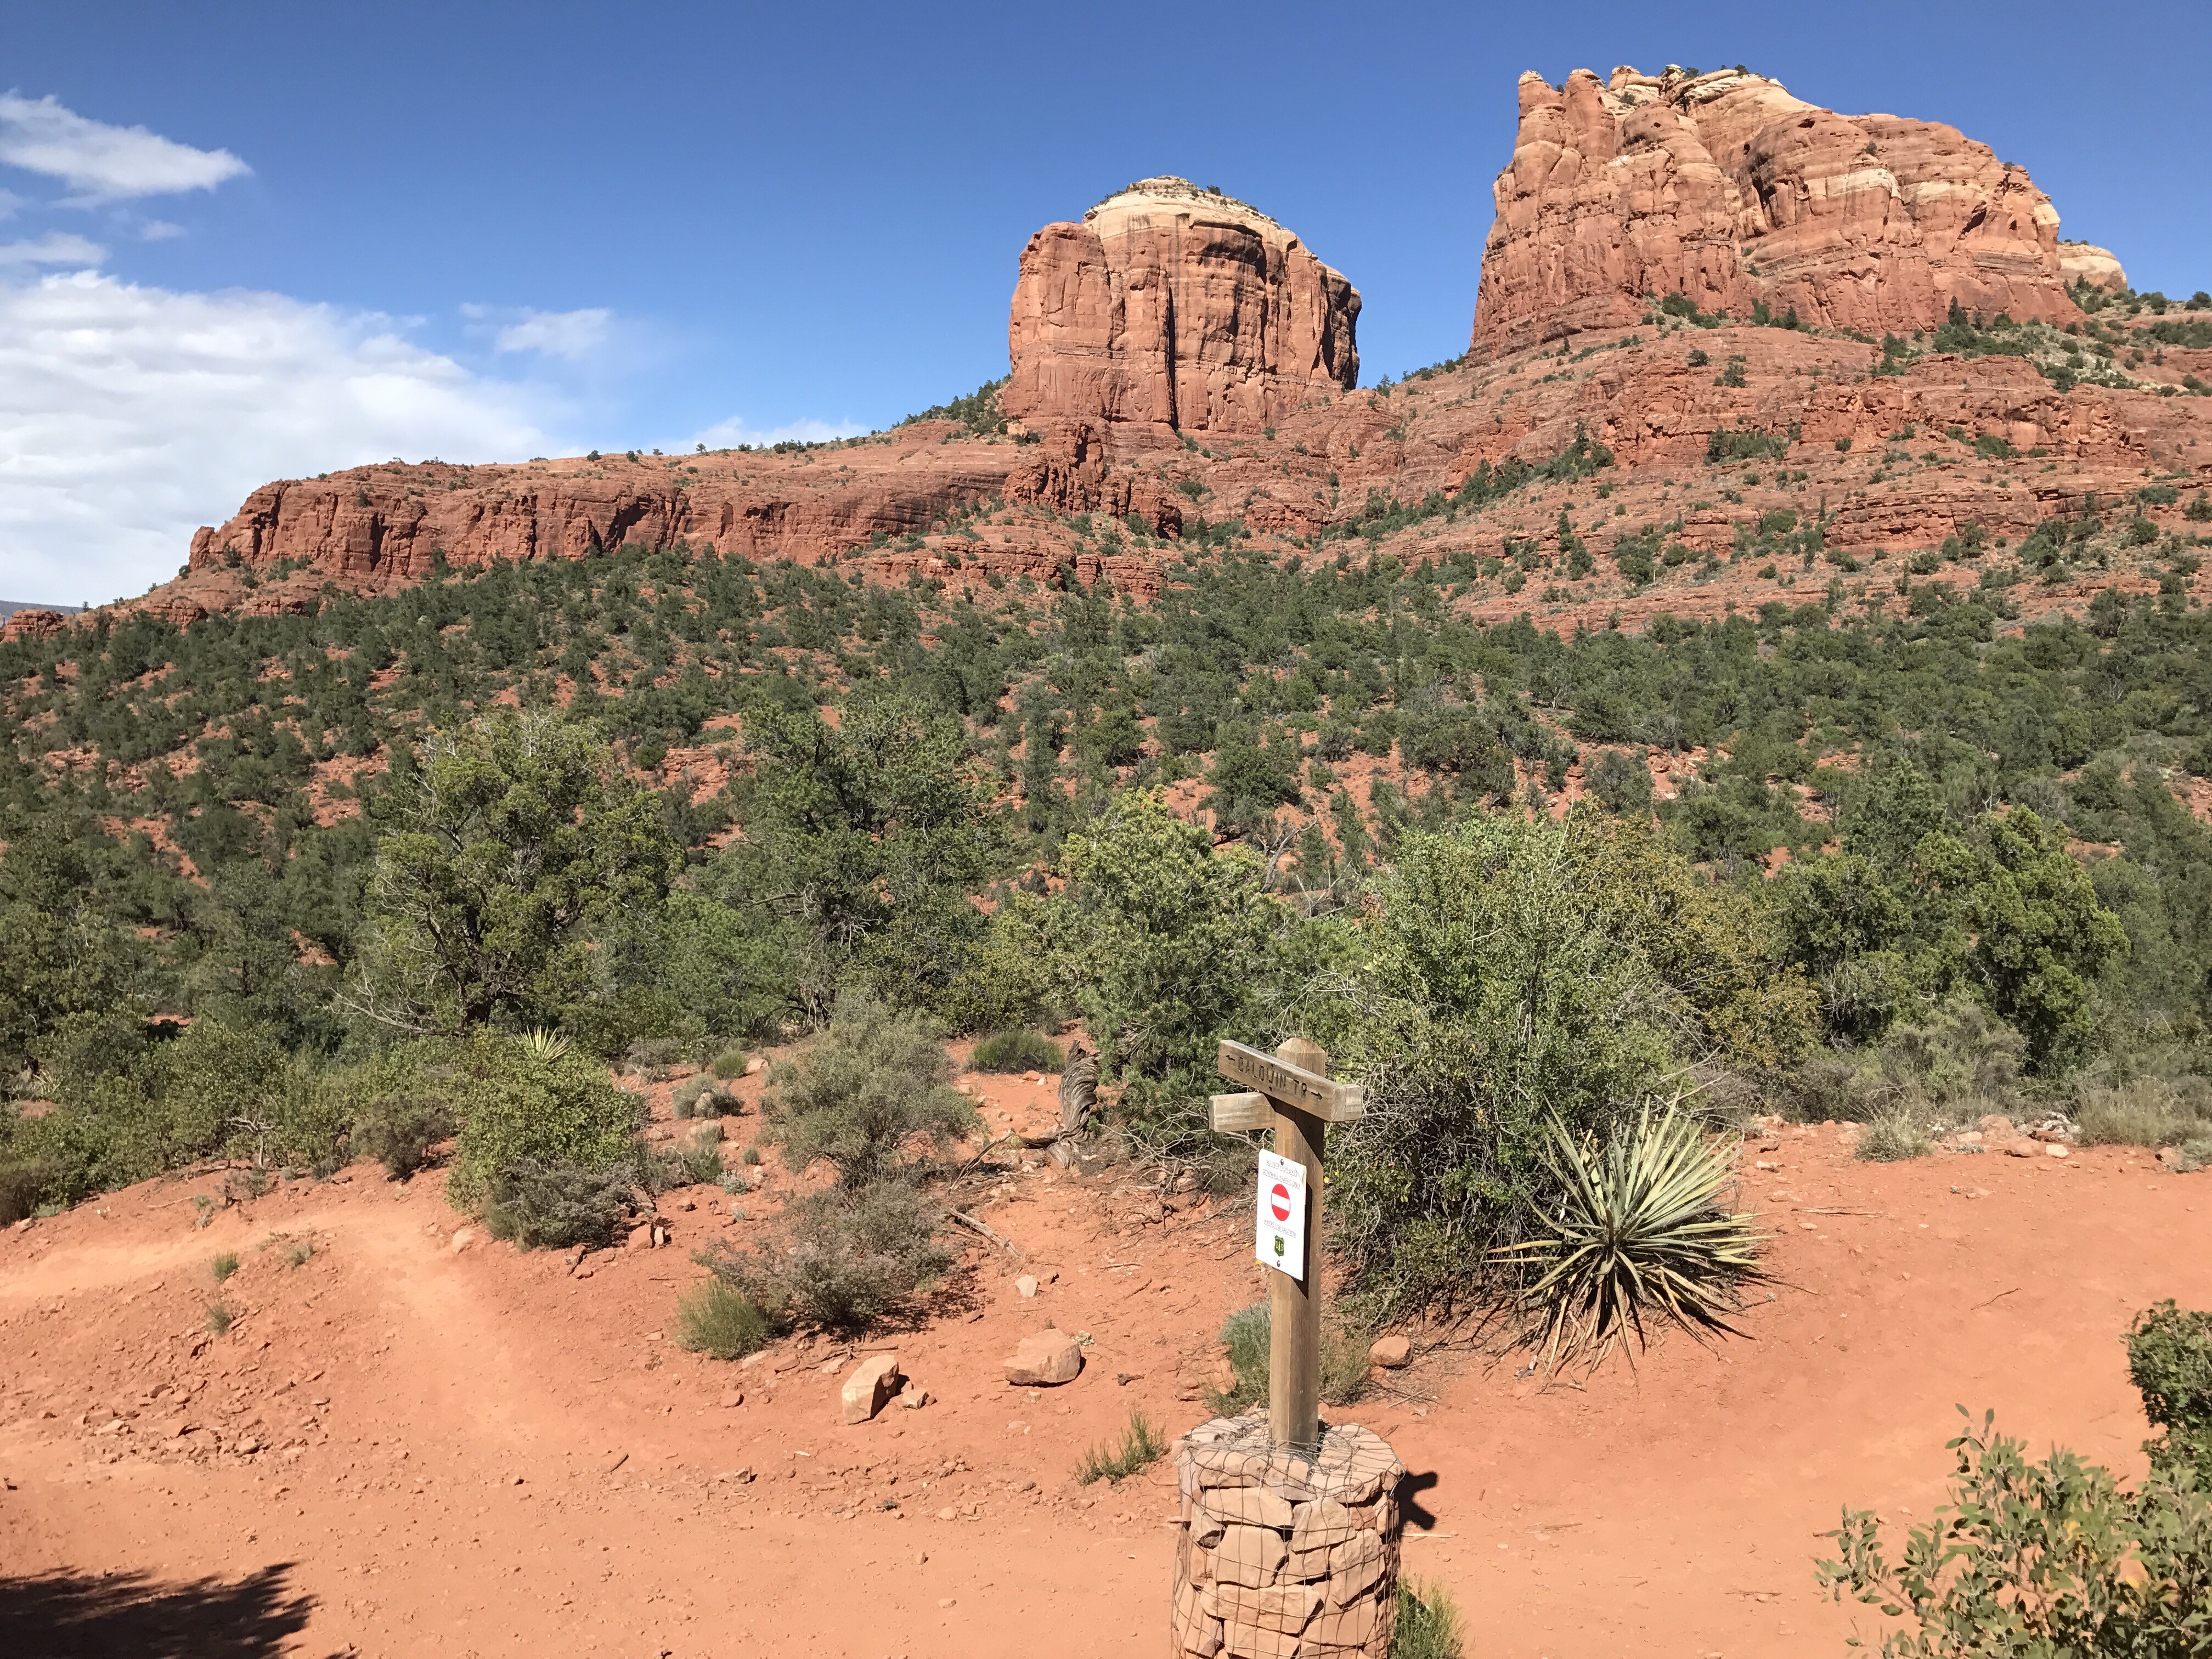 Getting closer again to Cathedral Rock as Baldwin Loop comes back to where I turned off from Templeton Trail. Sedona, AZ - 2017.04.28